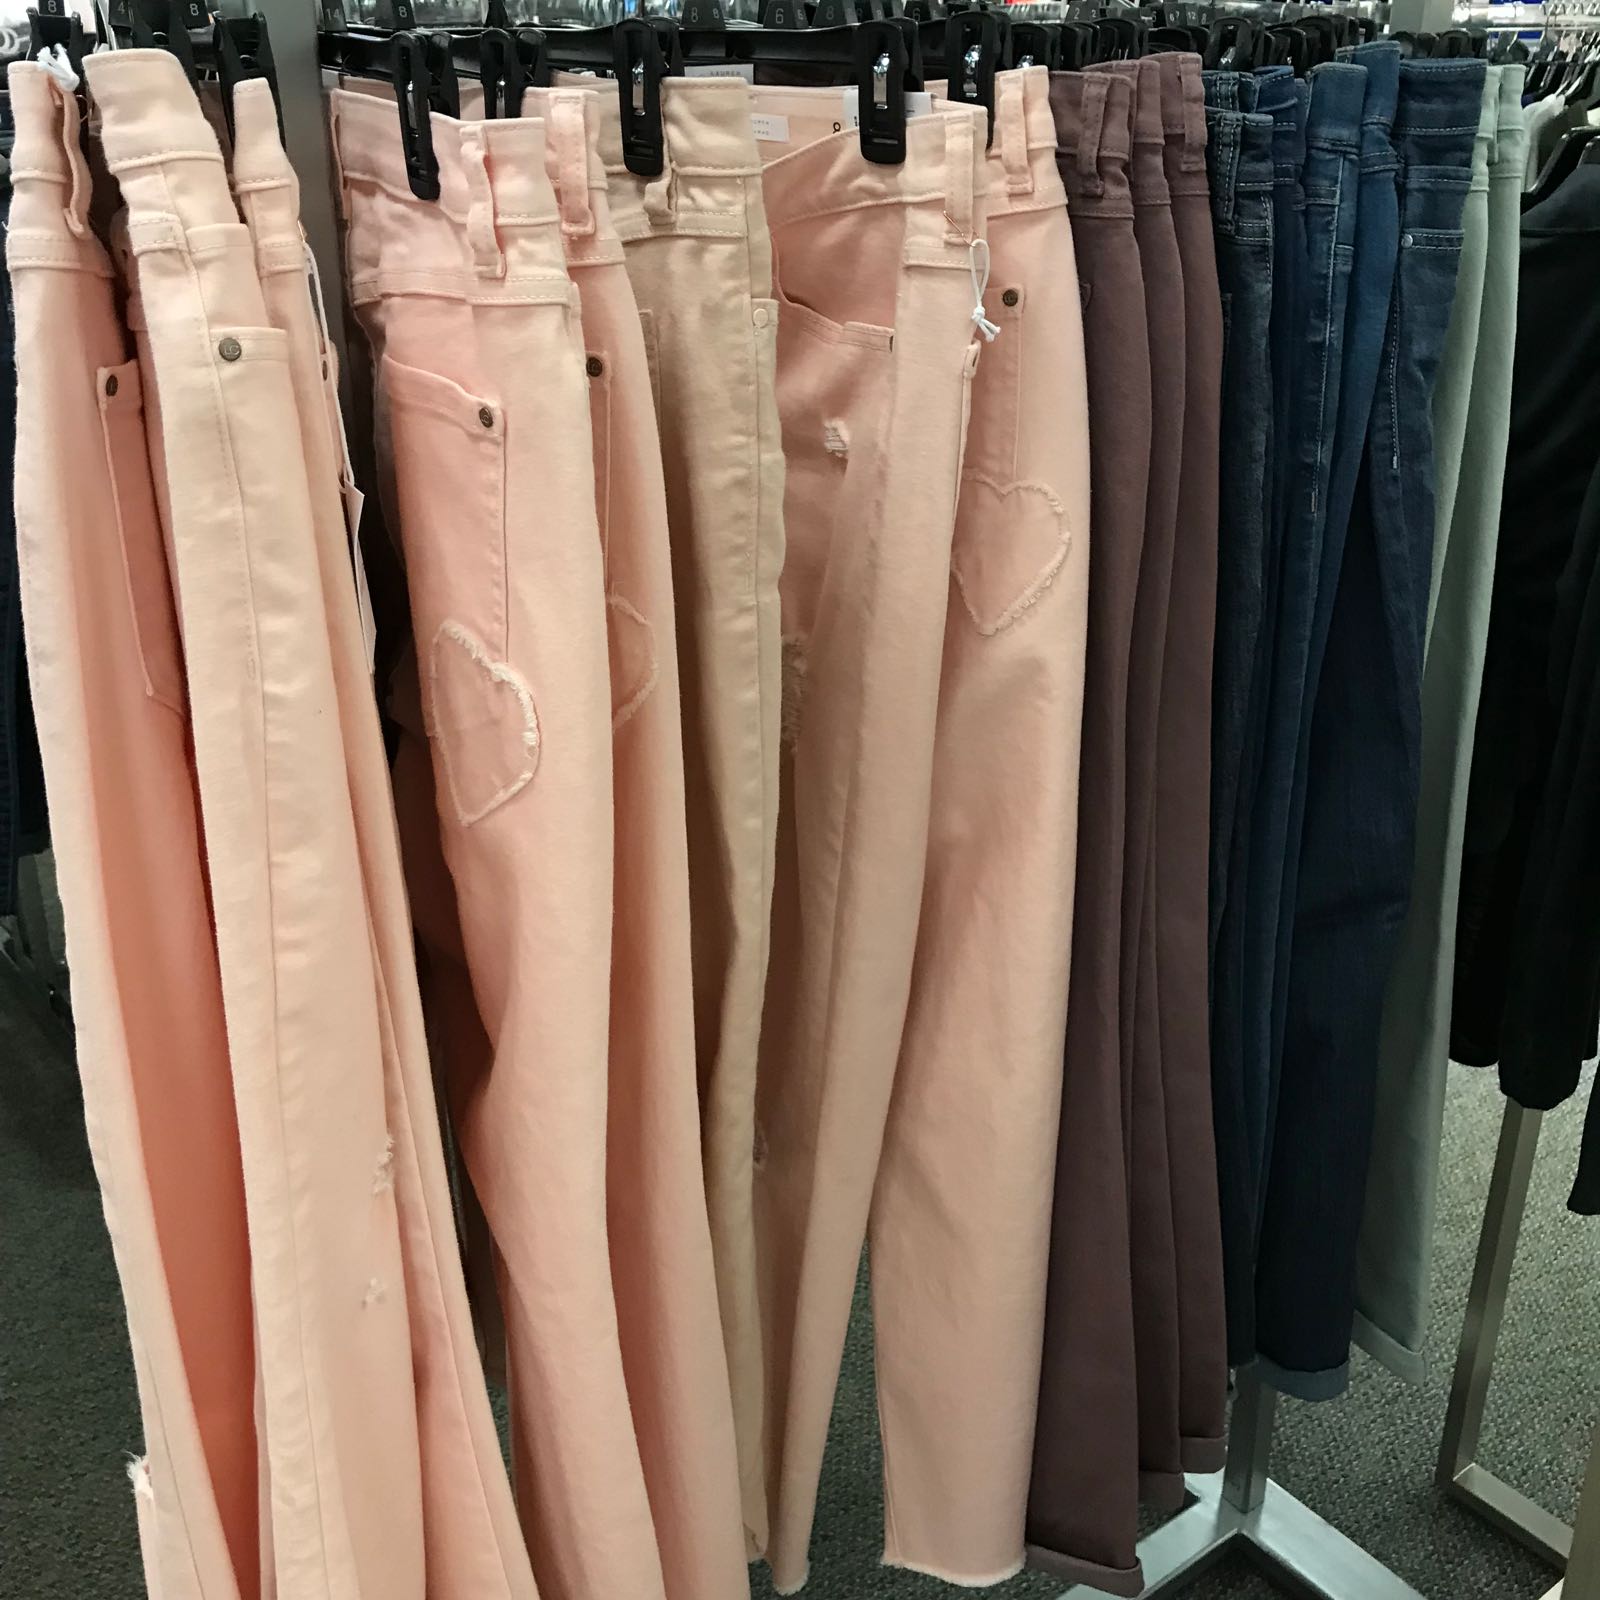 Cute spring fashions at Kohl's!